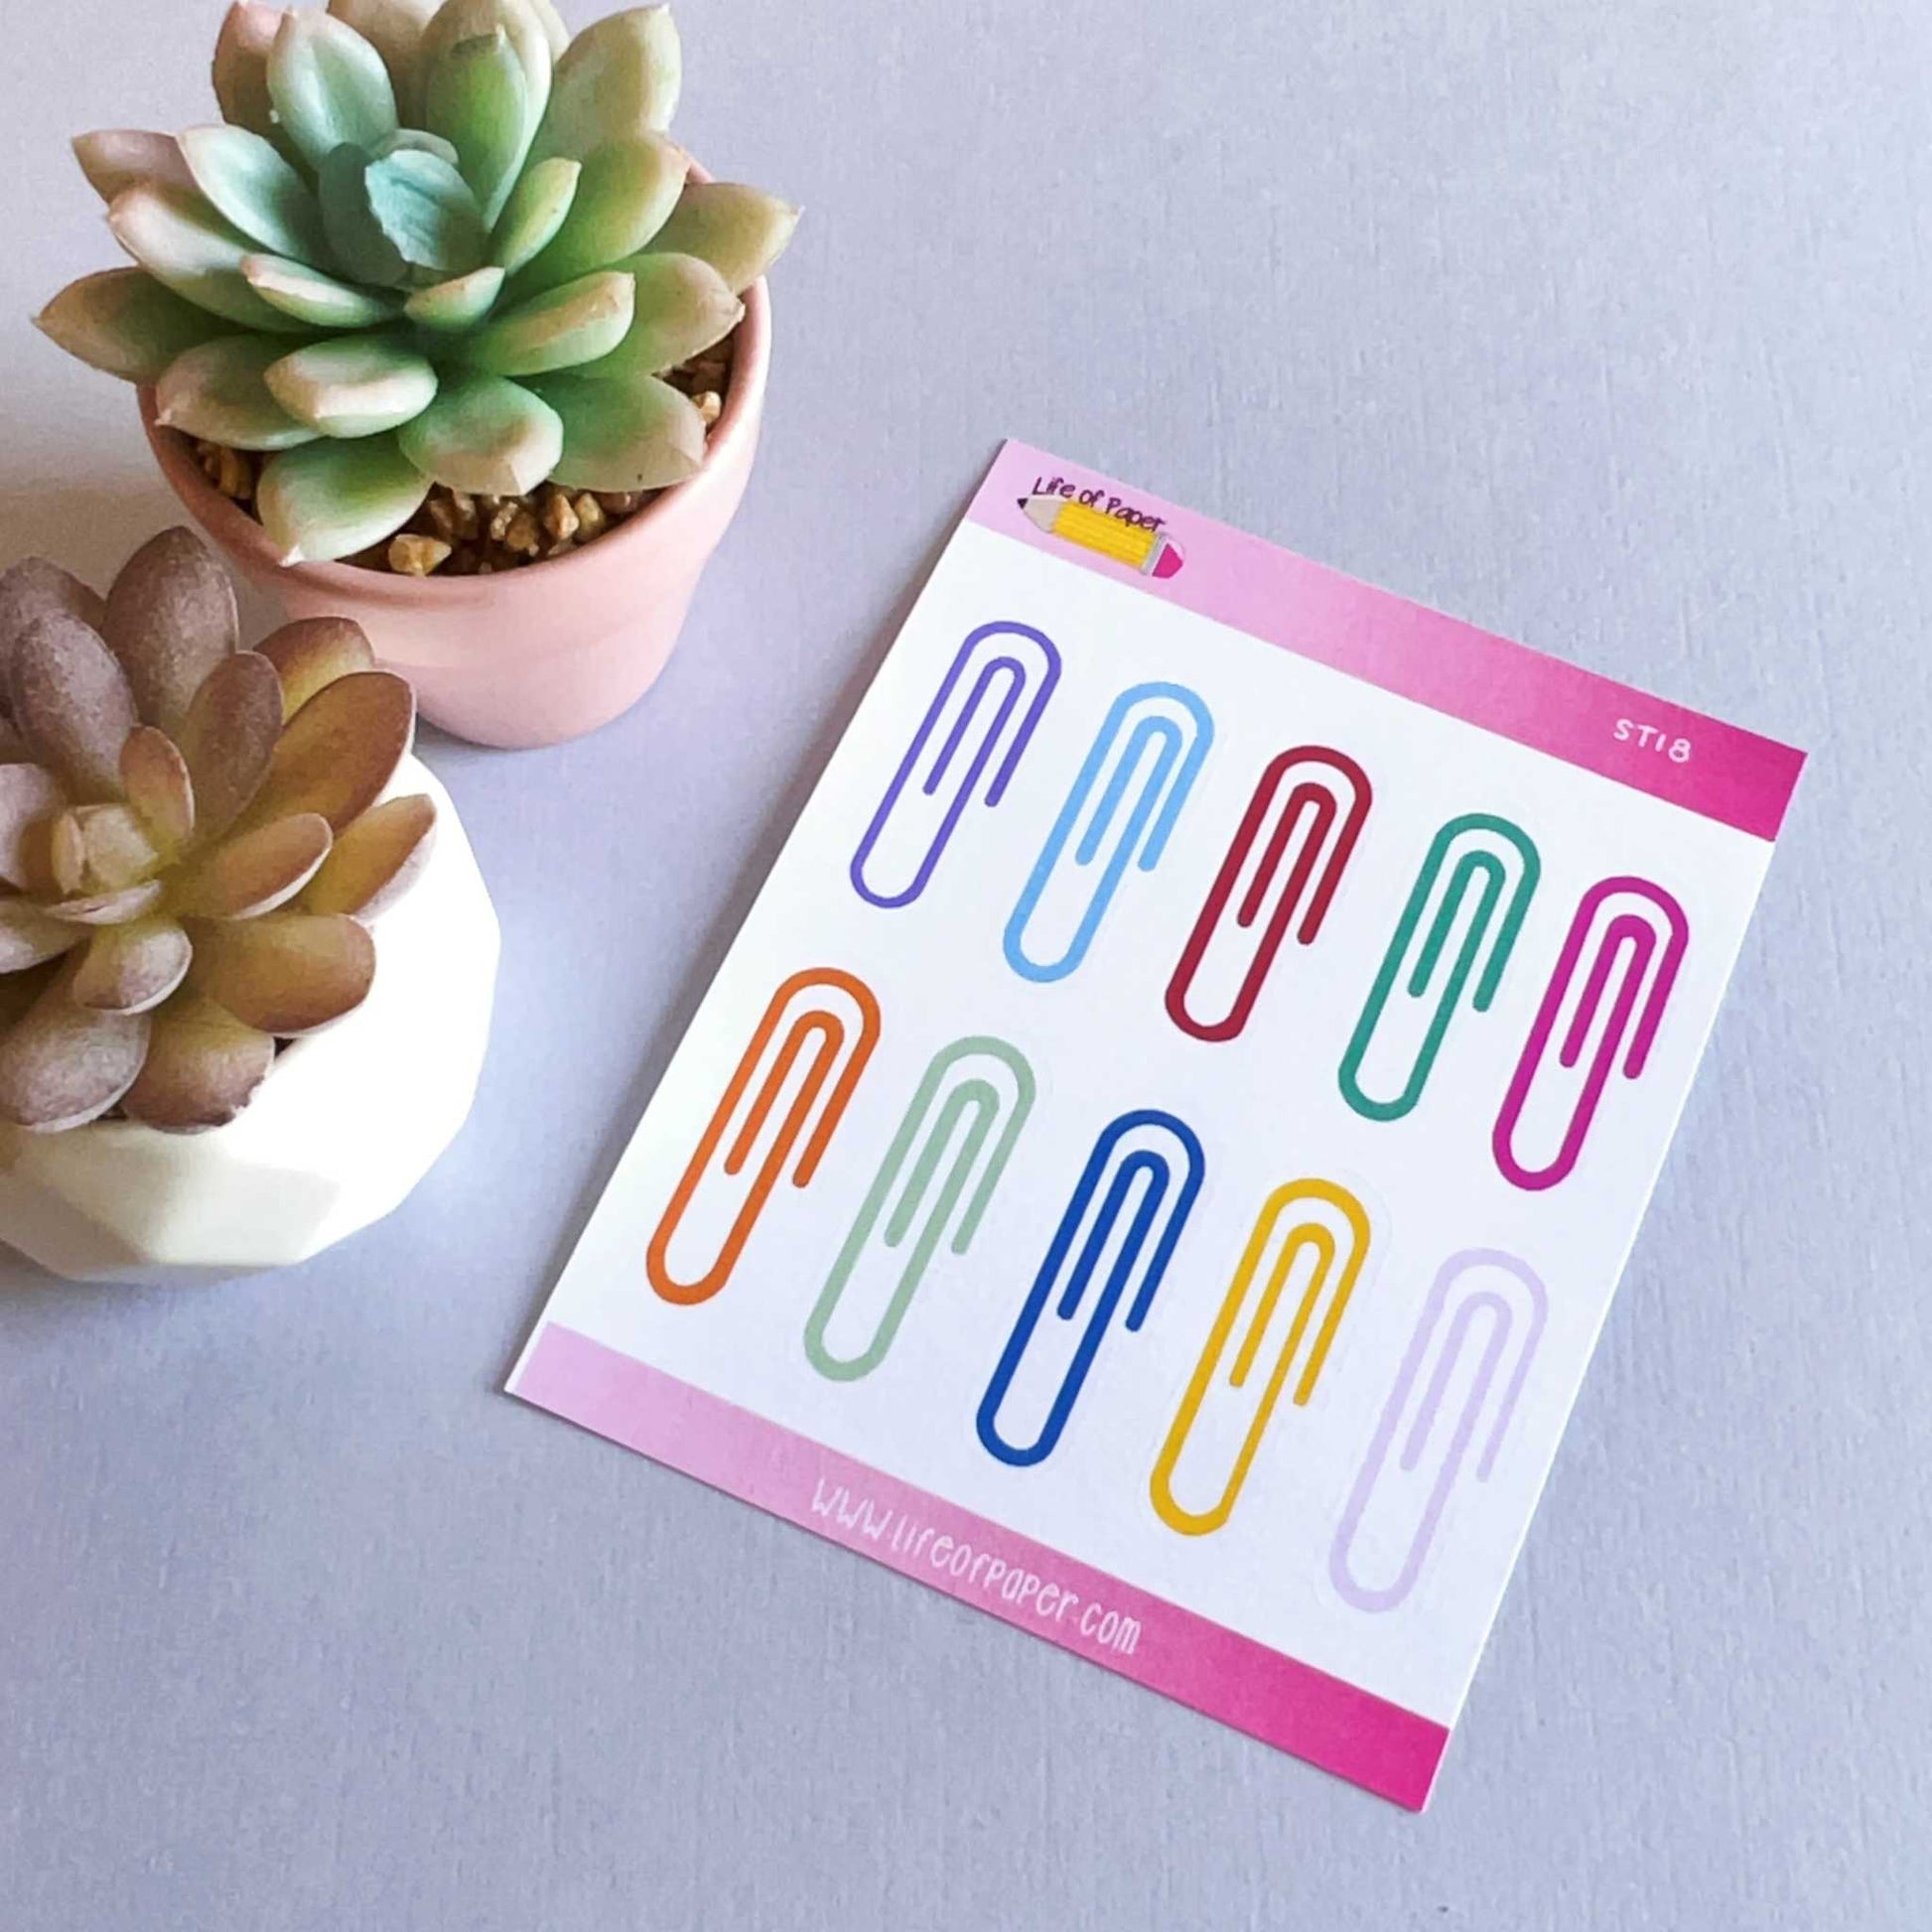 A pink and white sheet with Rainbow Paperclip Planner Stickers sits on a gray surface next to two small potted succulent plants, one in a round white pot and the other in a beige pot.